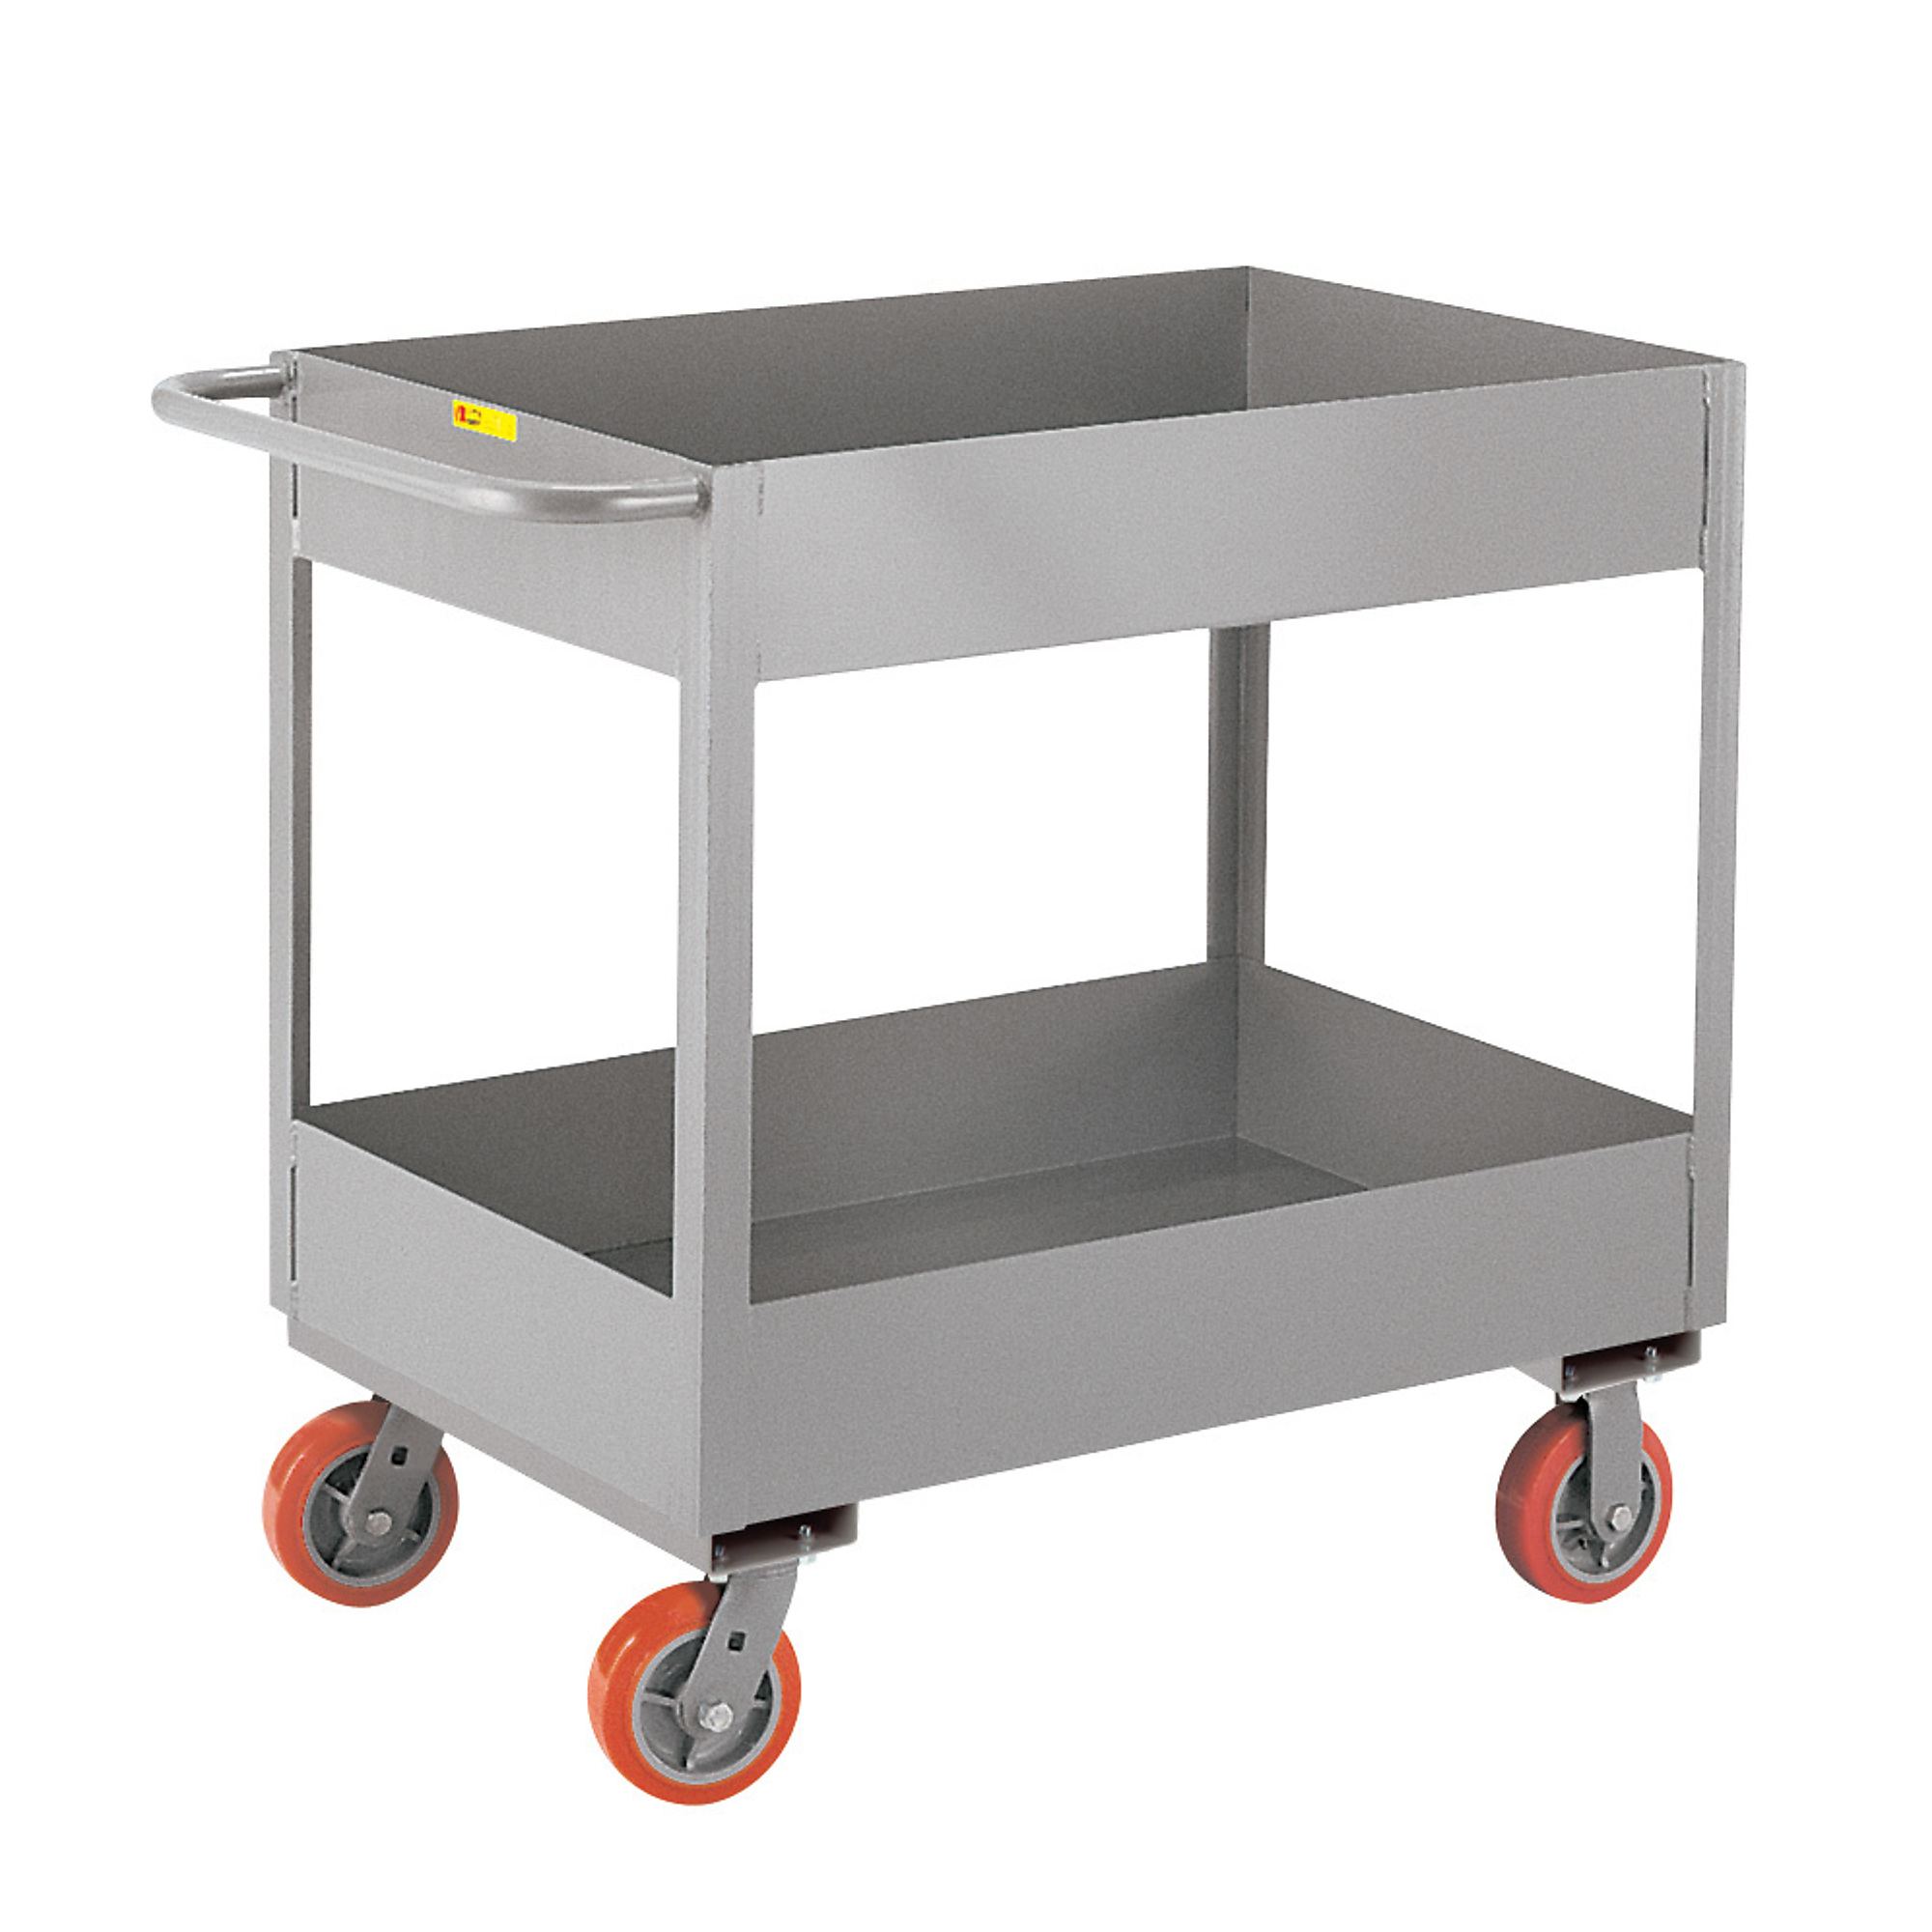 Little Giant, 6Inch Deep Shelf Truck, 24x36, 3600 lbs, Total Capacity 3600 lb, Shelves (qty.) 2, Material Carbon Steel, Model DS2436X6-6PY